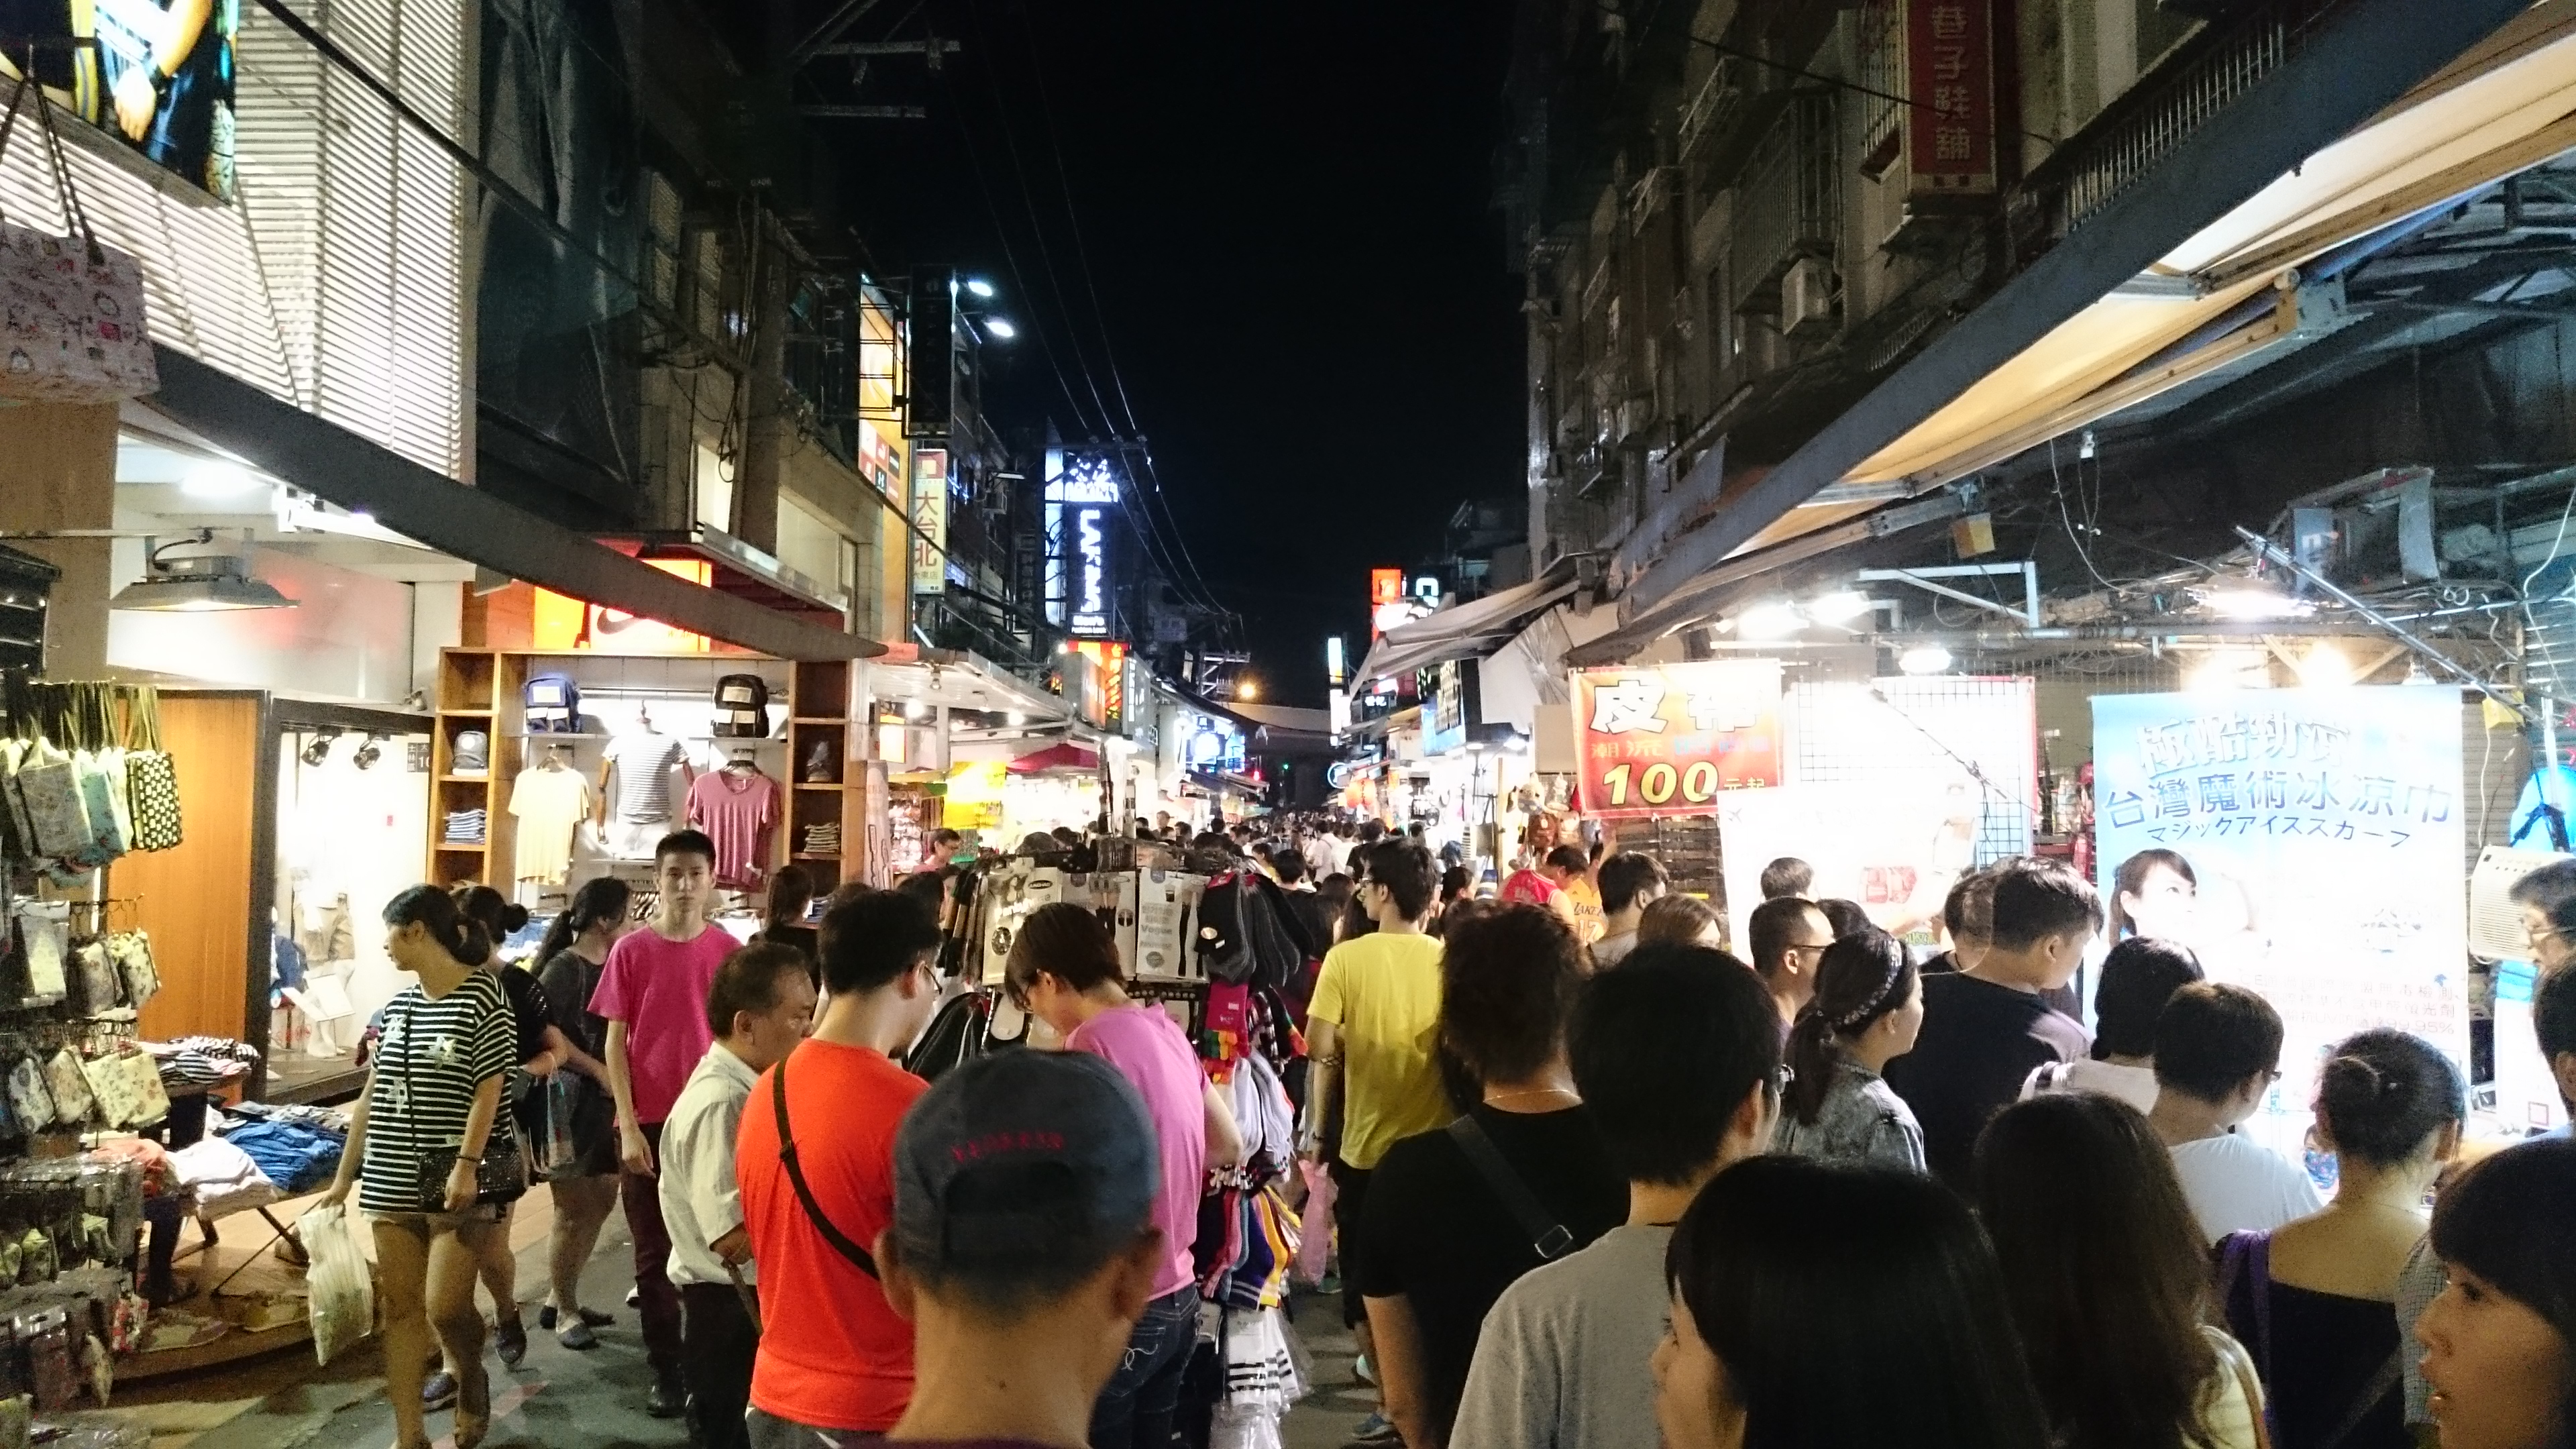 In the night market photo